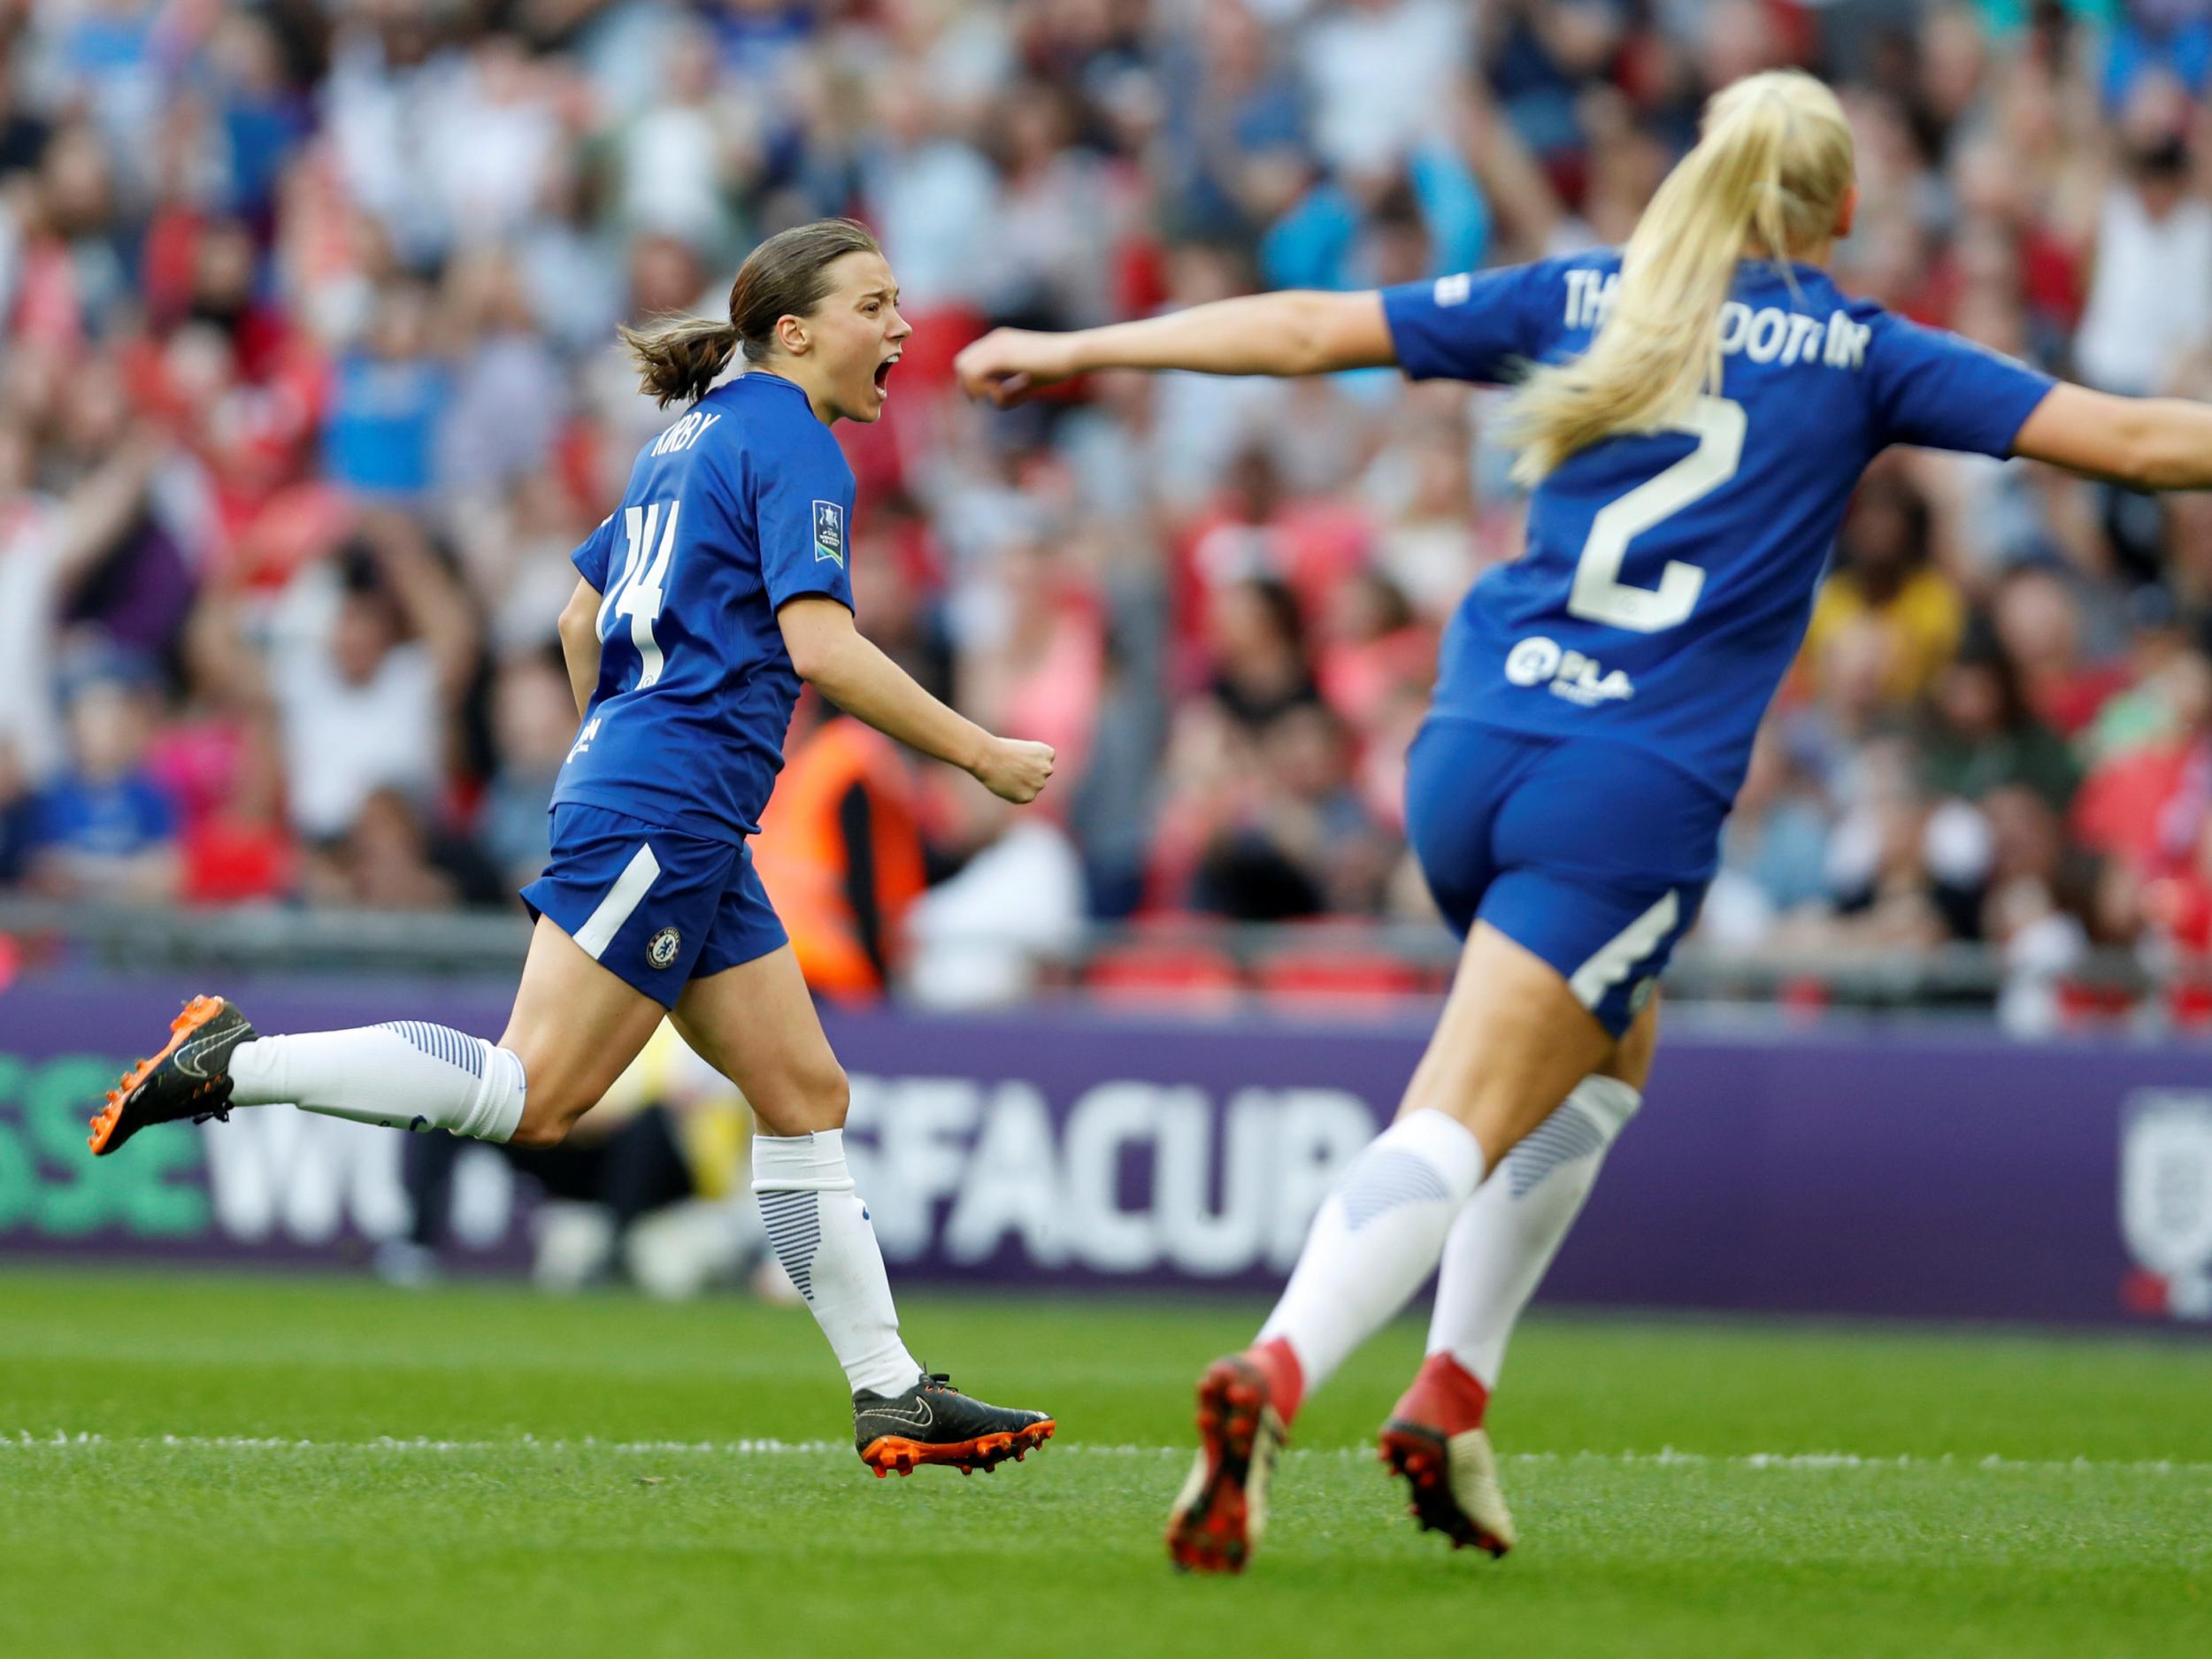 Fran Kirby stars as Chelsea Ladies win second Women&apos;s FA Cup over Arsenal